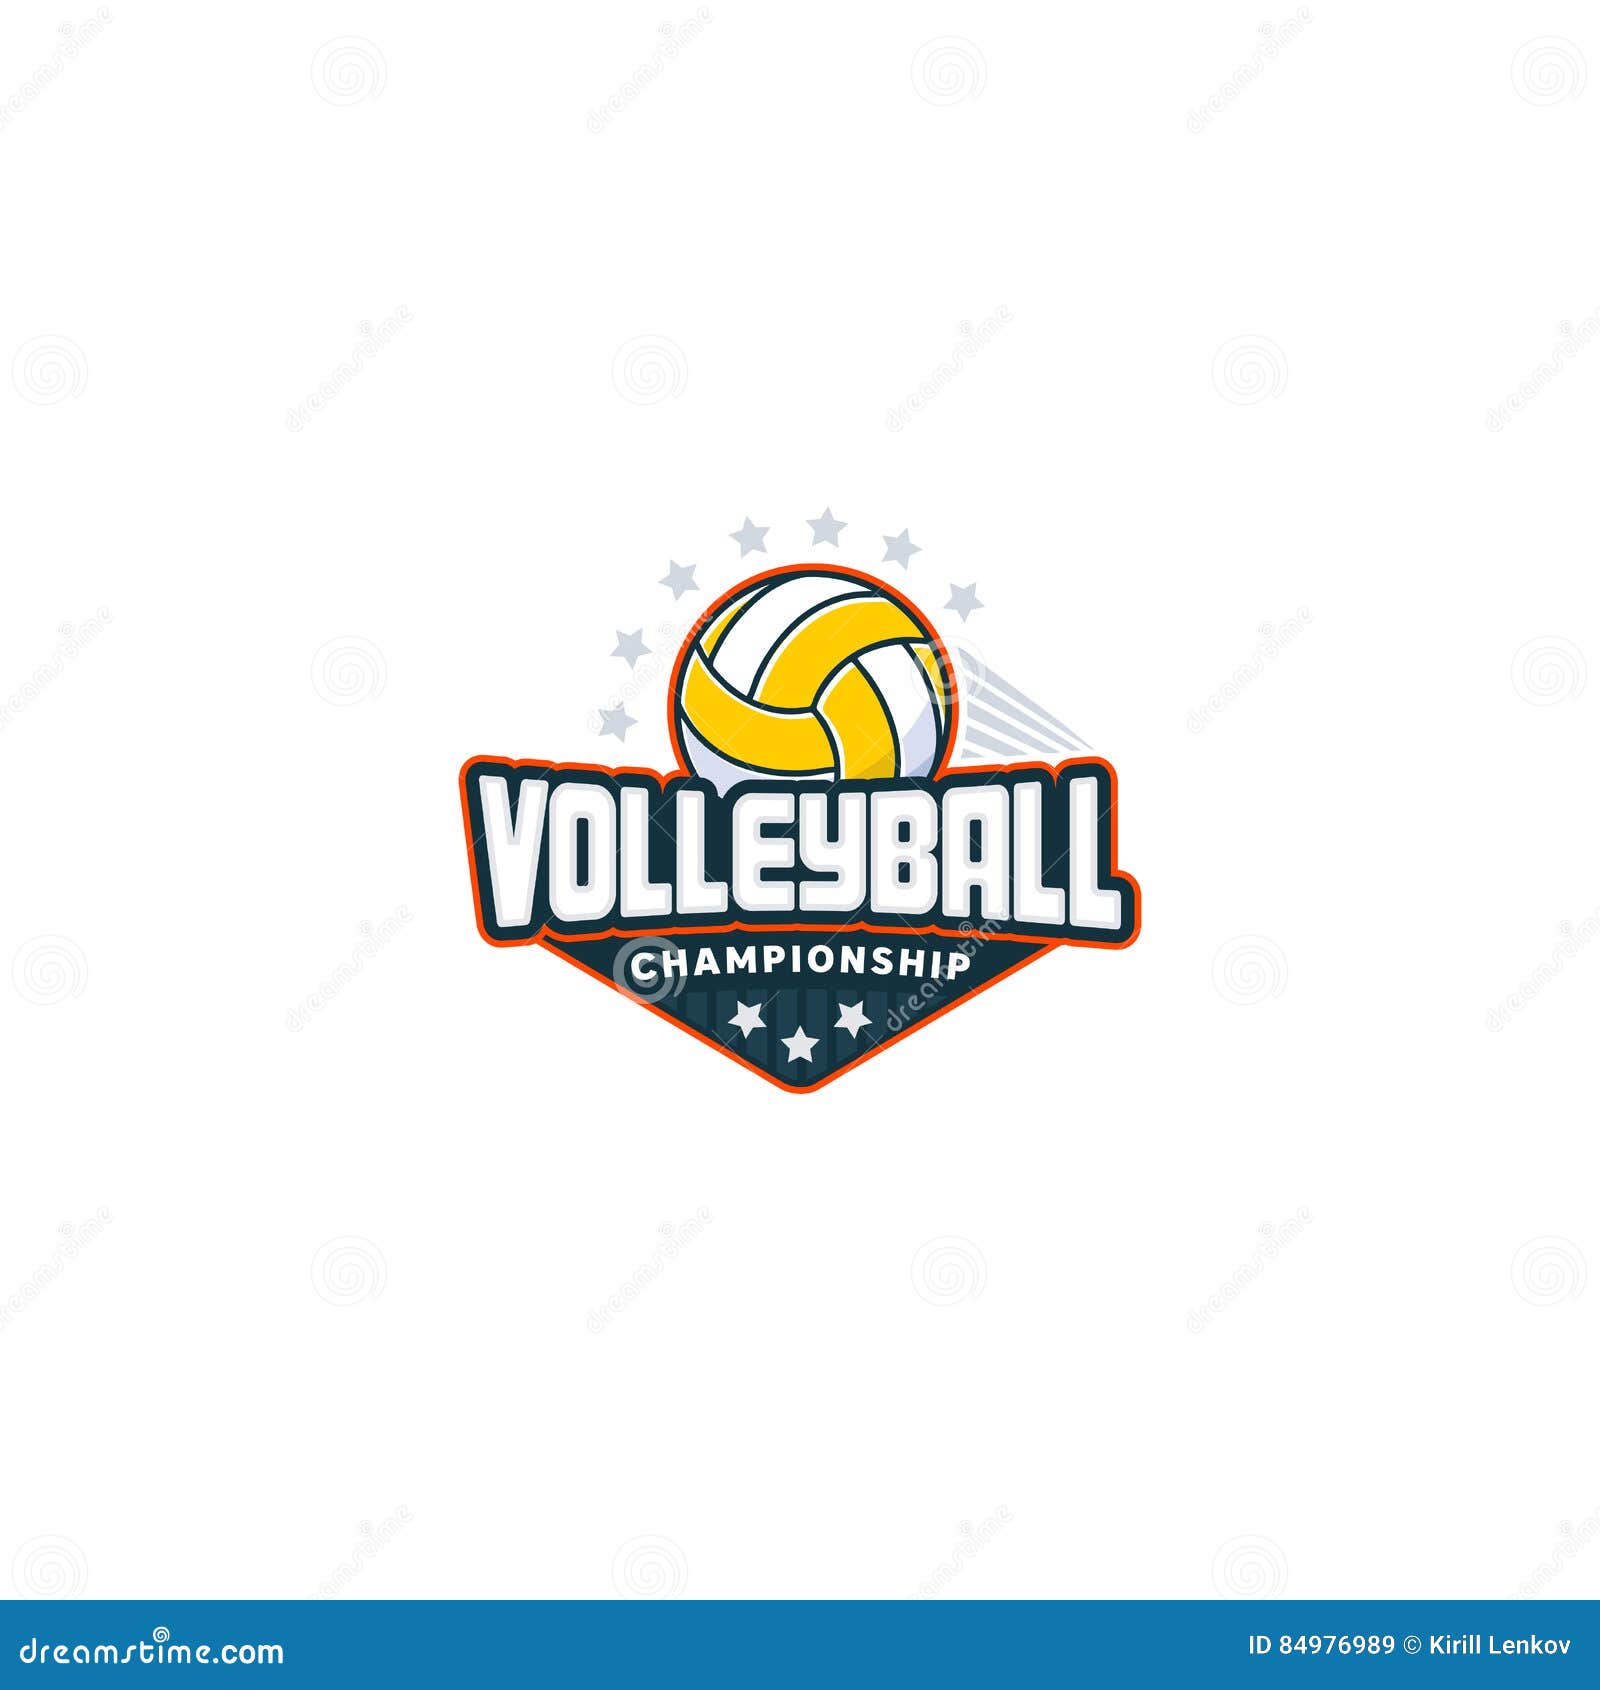 Volleyball badge logo stock vector. Illustration of icon - 84976989